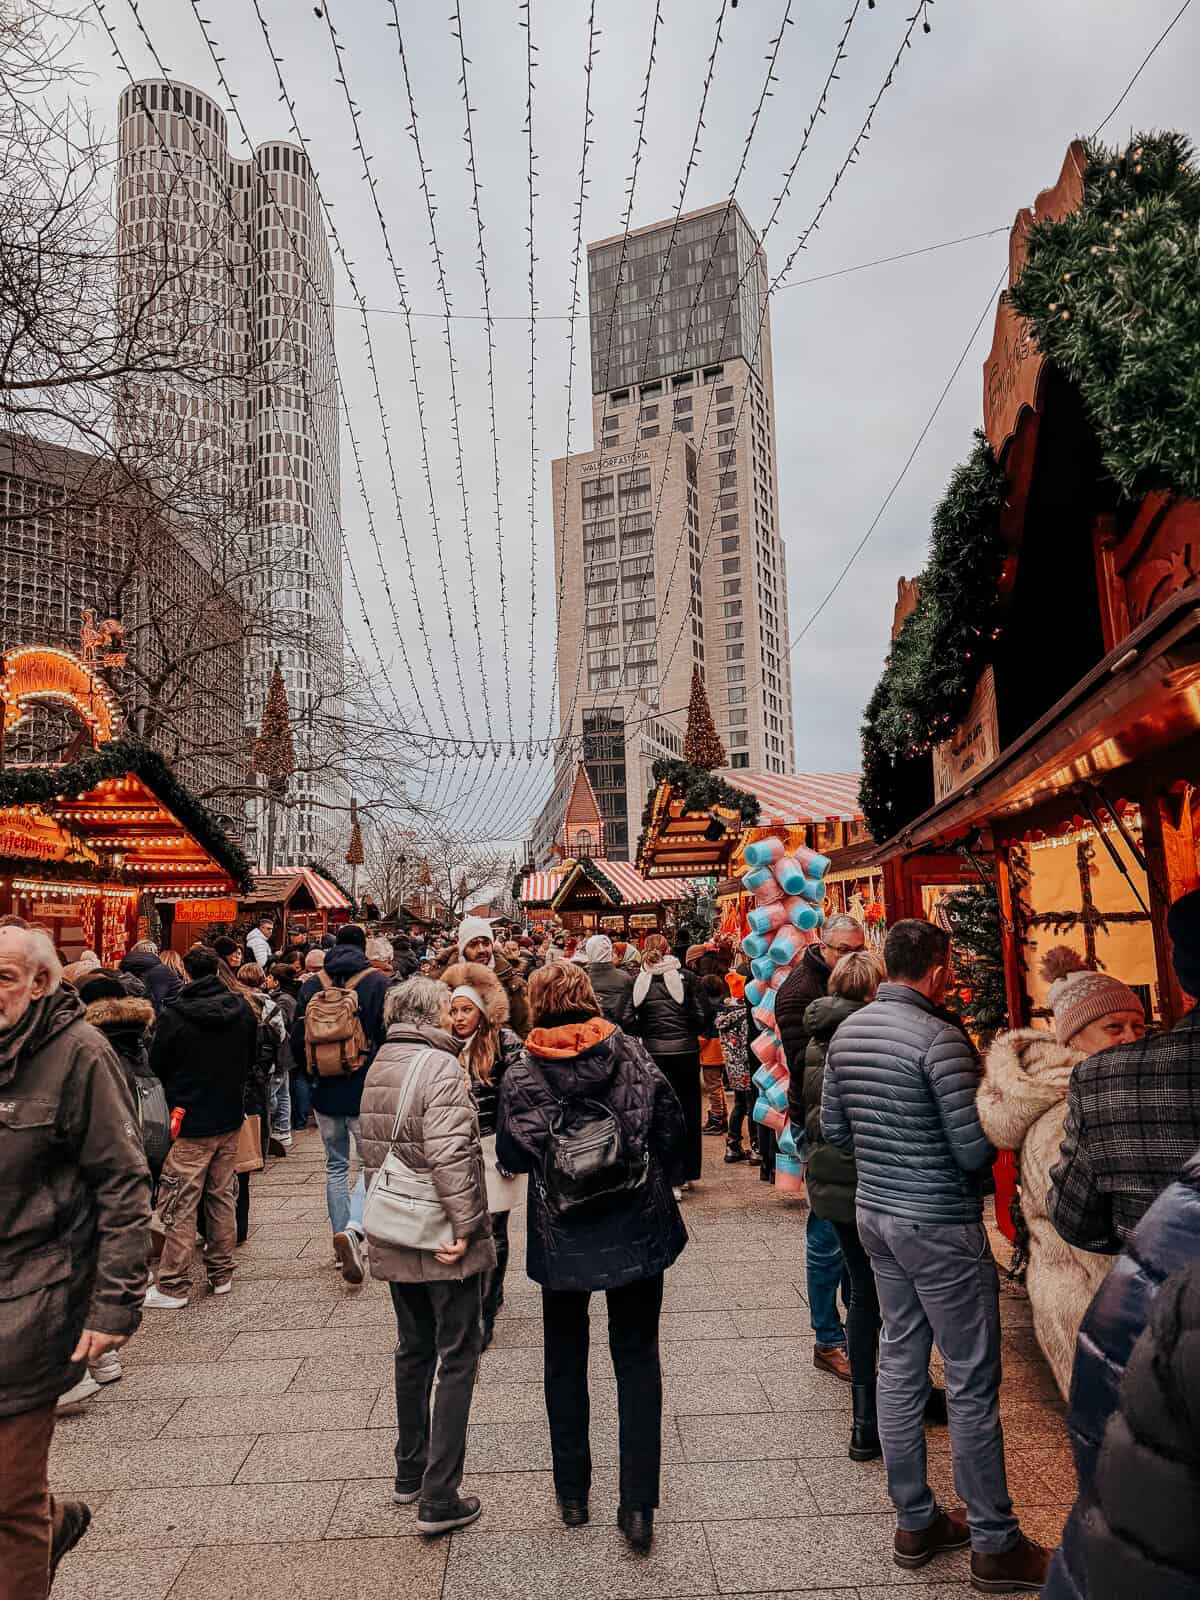 A Christmas market set against a backdrop of modern high-rise buildings, adorned with festive decorations and strings of lights overhead. Crowds of shoppers explore various stalls offering holiday treats and goods